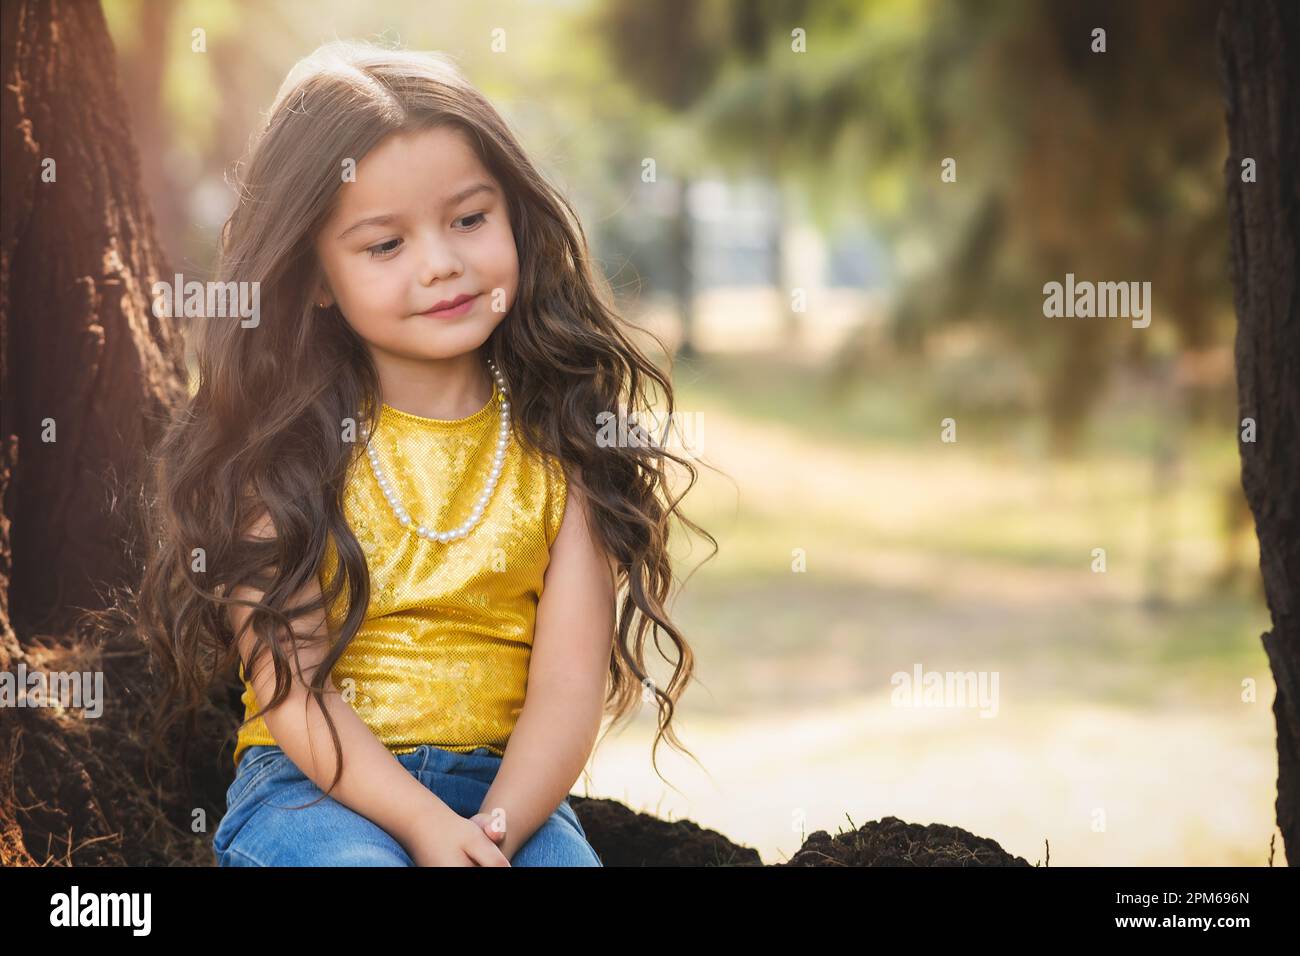 Blonde preschool girl sitting in a tree has a happy time in nature, cute smile. children's day theme. Stock Photo